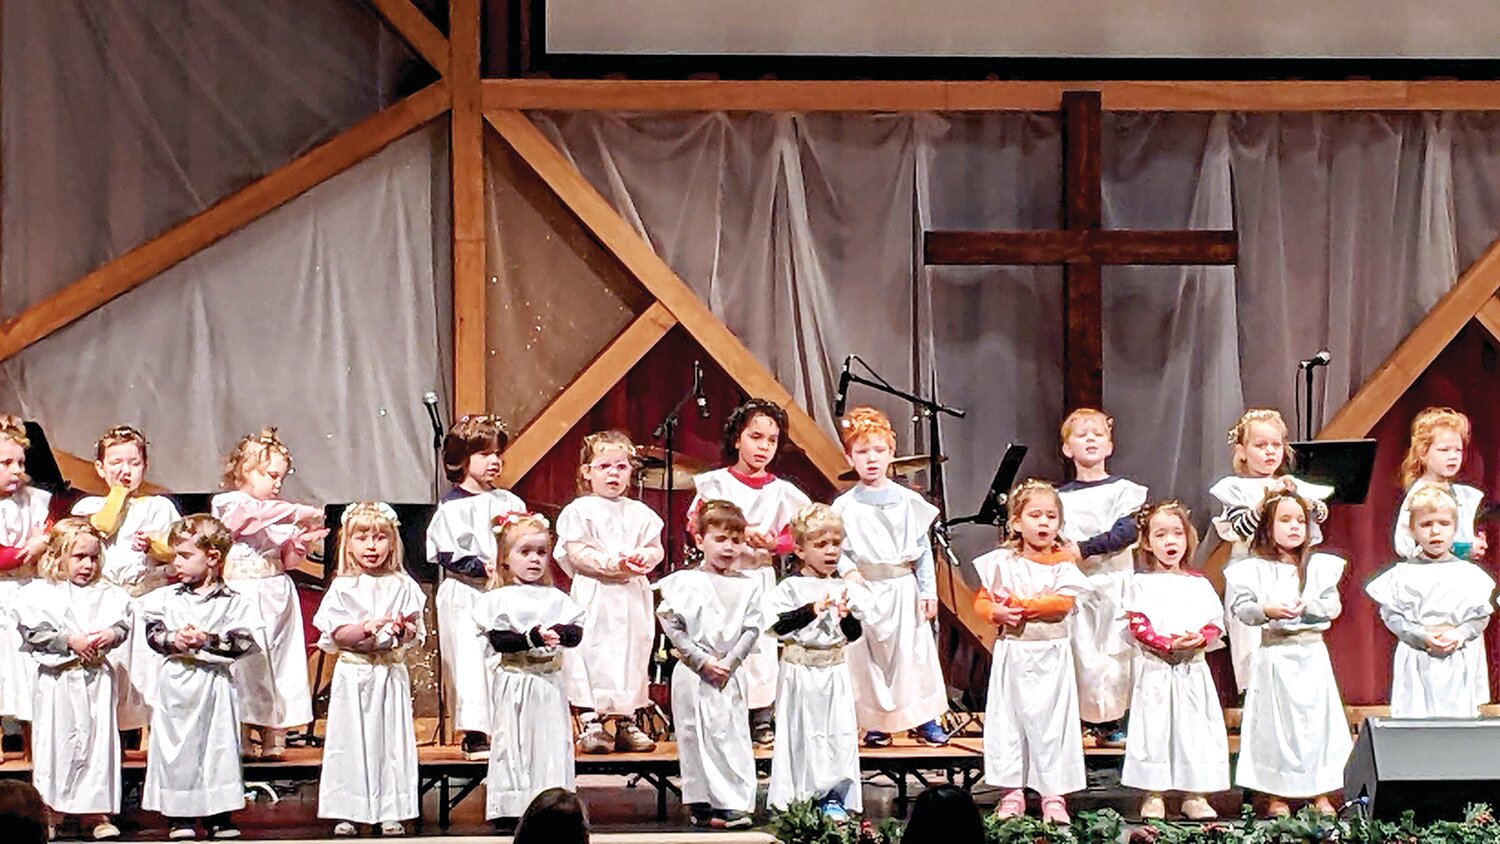 Woodside Christian Preschool students sing during a Christmas concert.